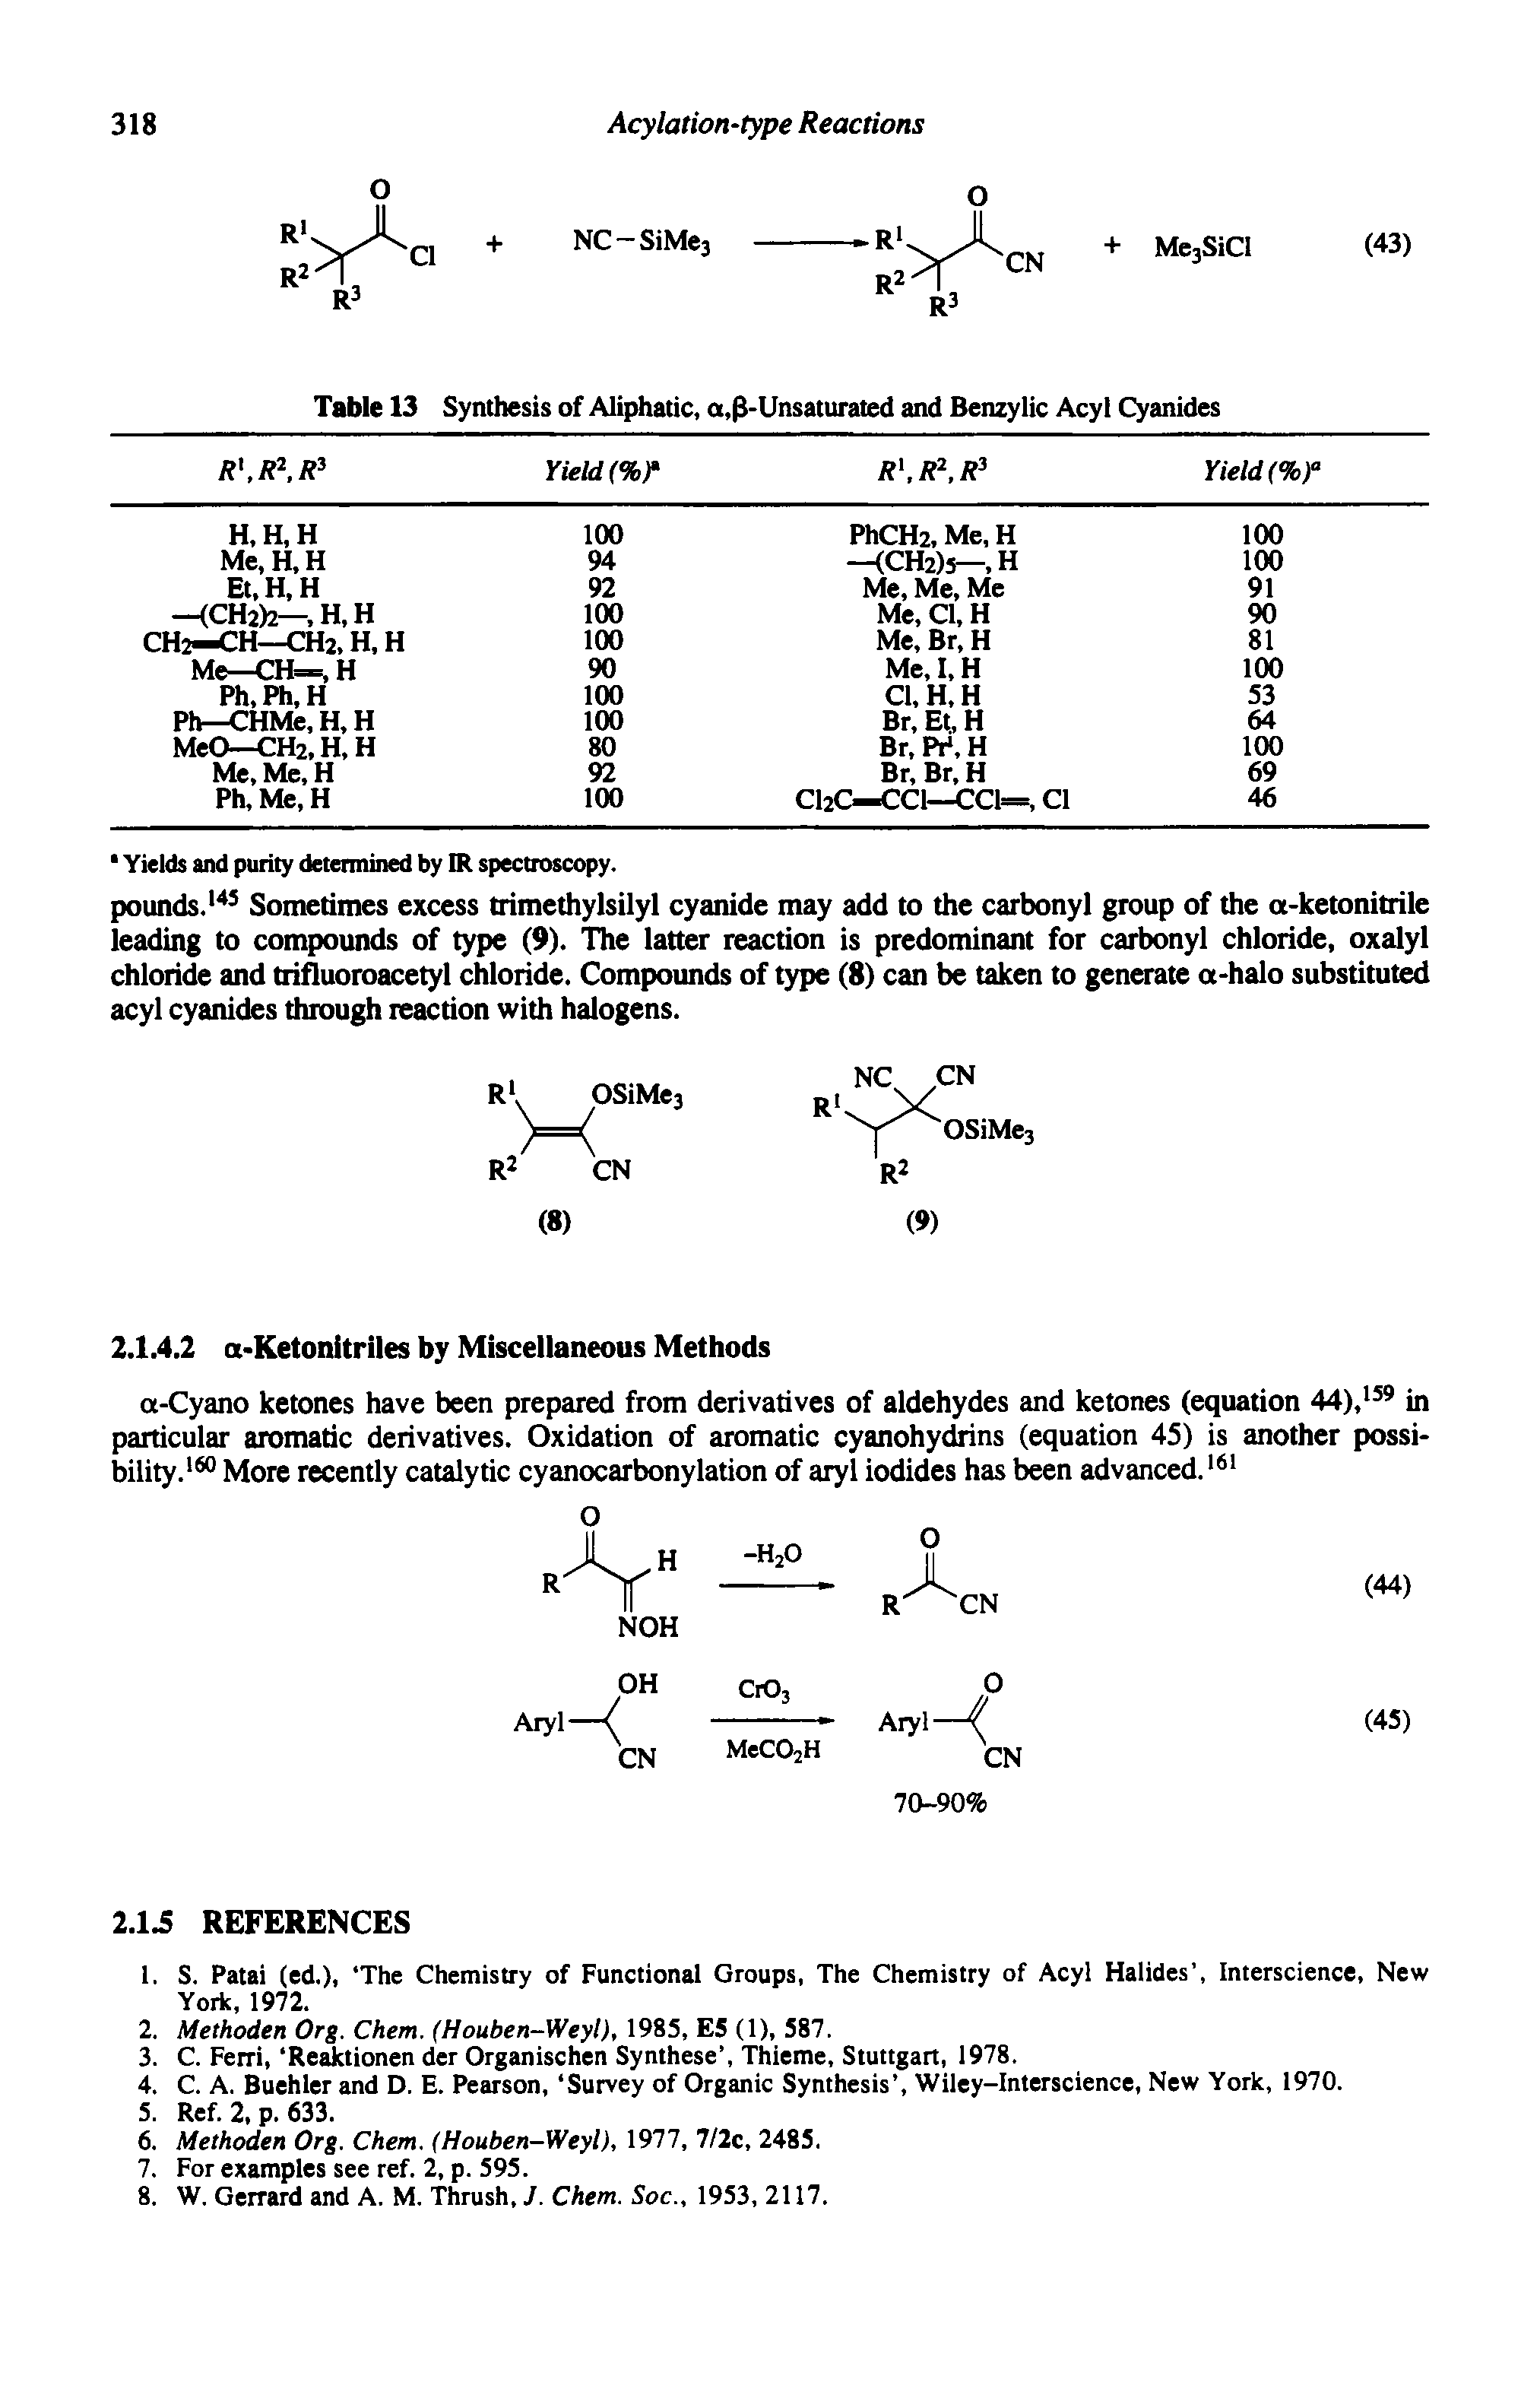 Table 13 Synthesis of Aliphatic, a. -Unsaturated and Benzylic Acyl Cyanides...